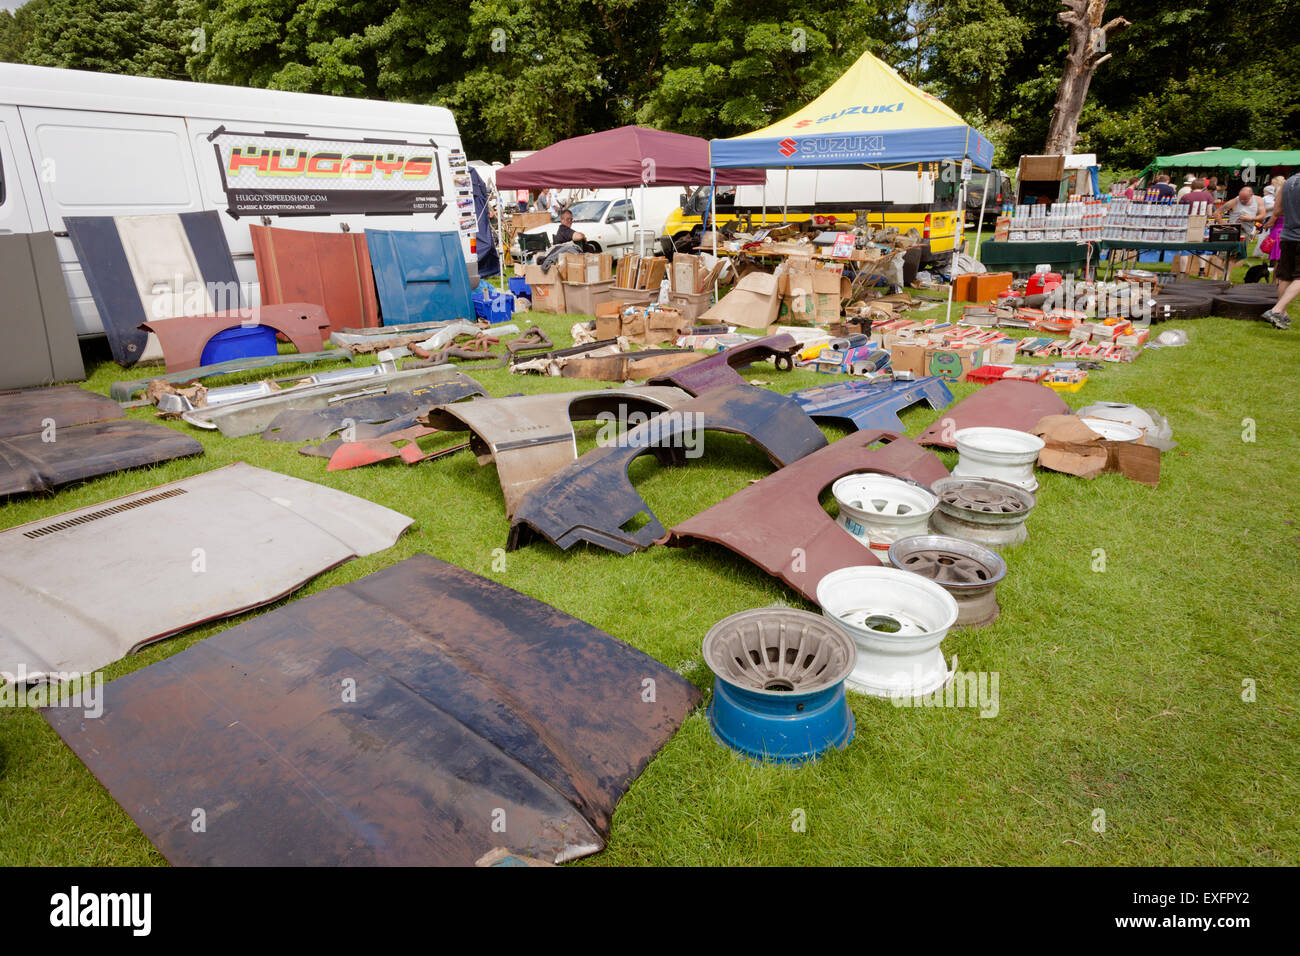 Outdoor market stall at a classic car show, selling car parts and tools, UK Stock Photo